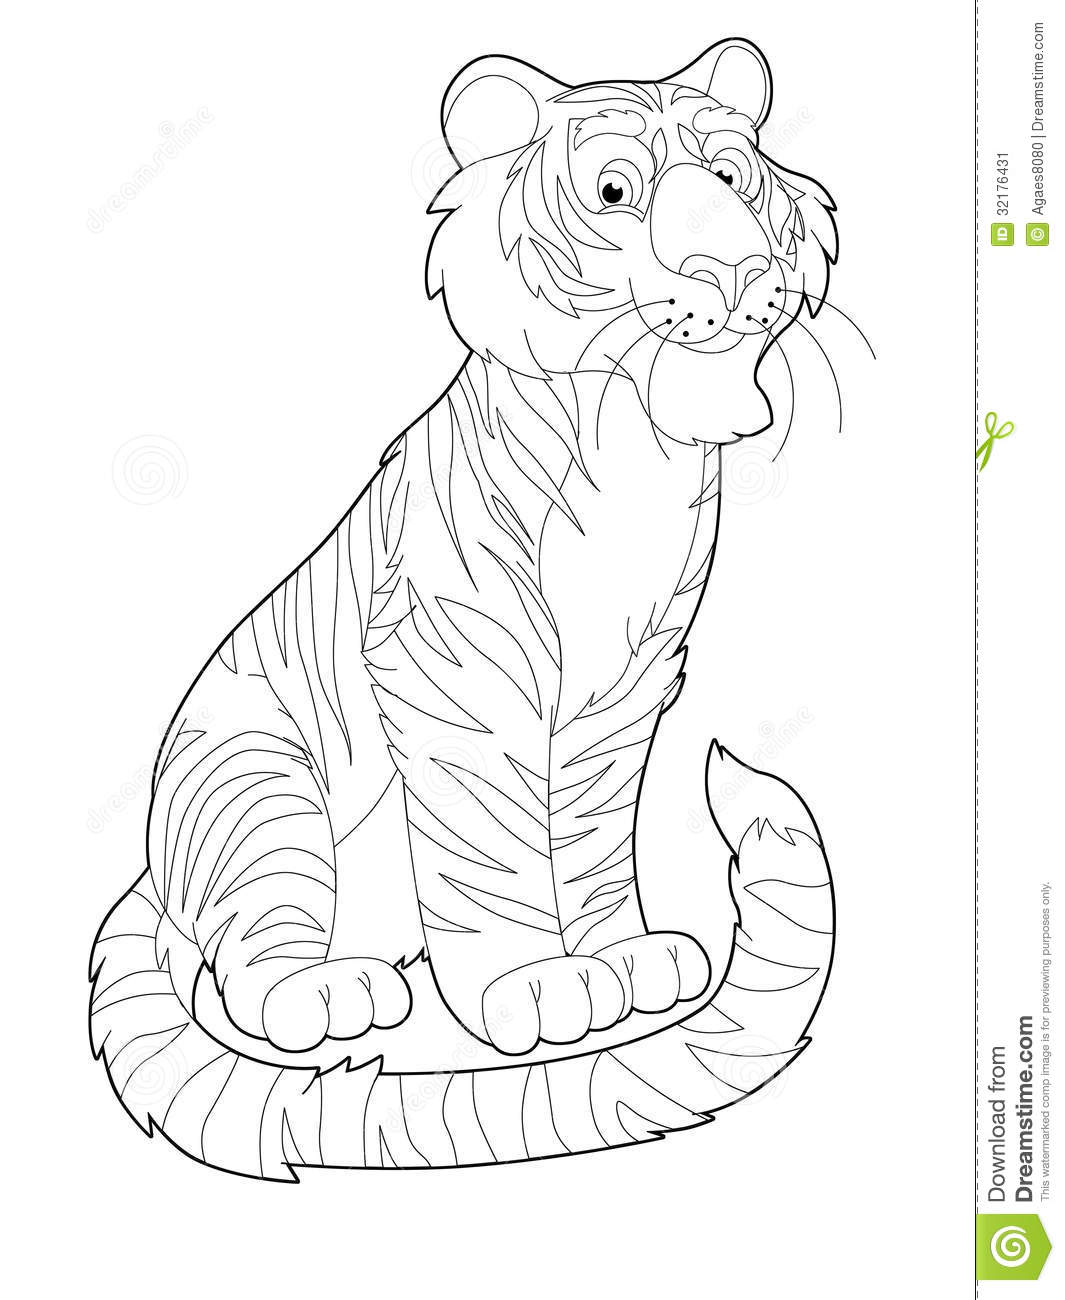 safari-coloring-pages-to-download-and-print-for-free